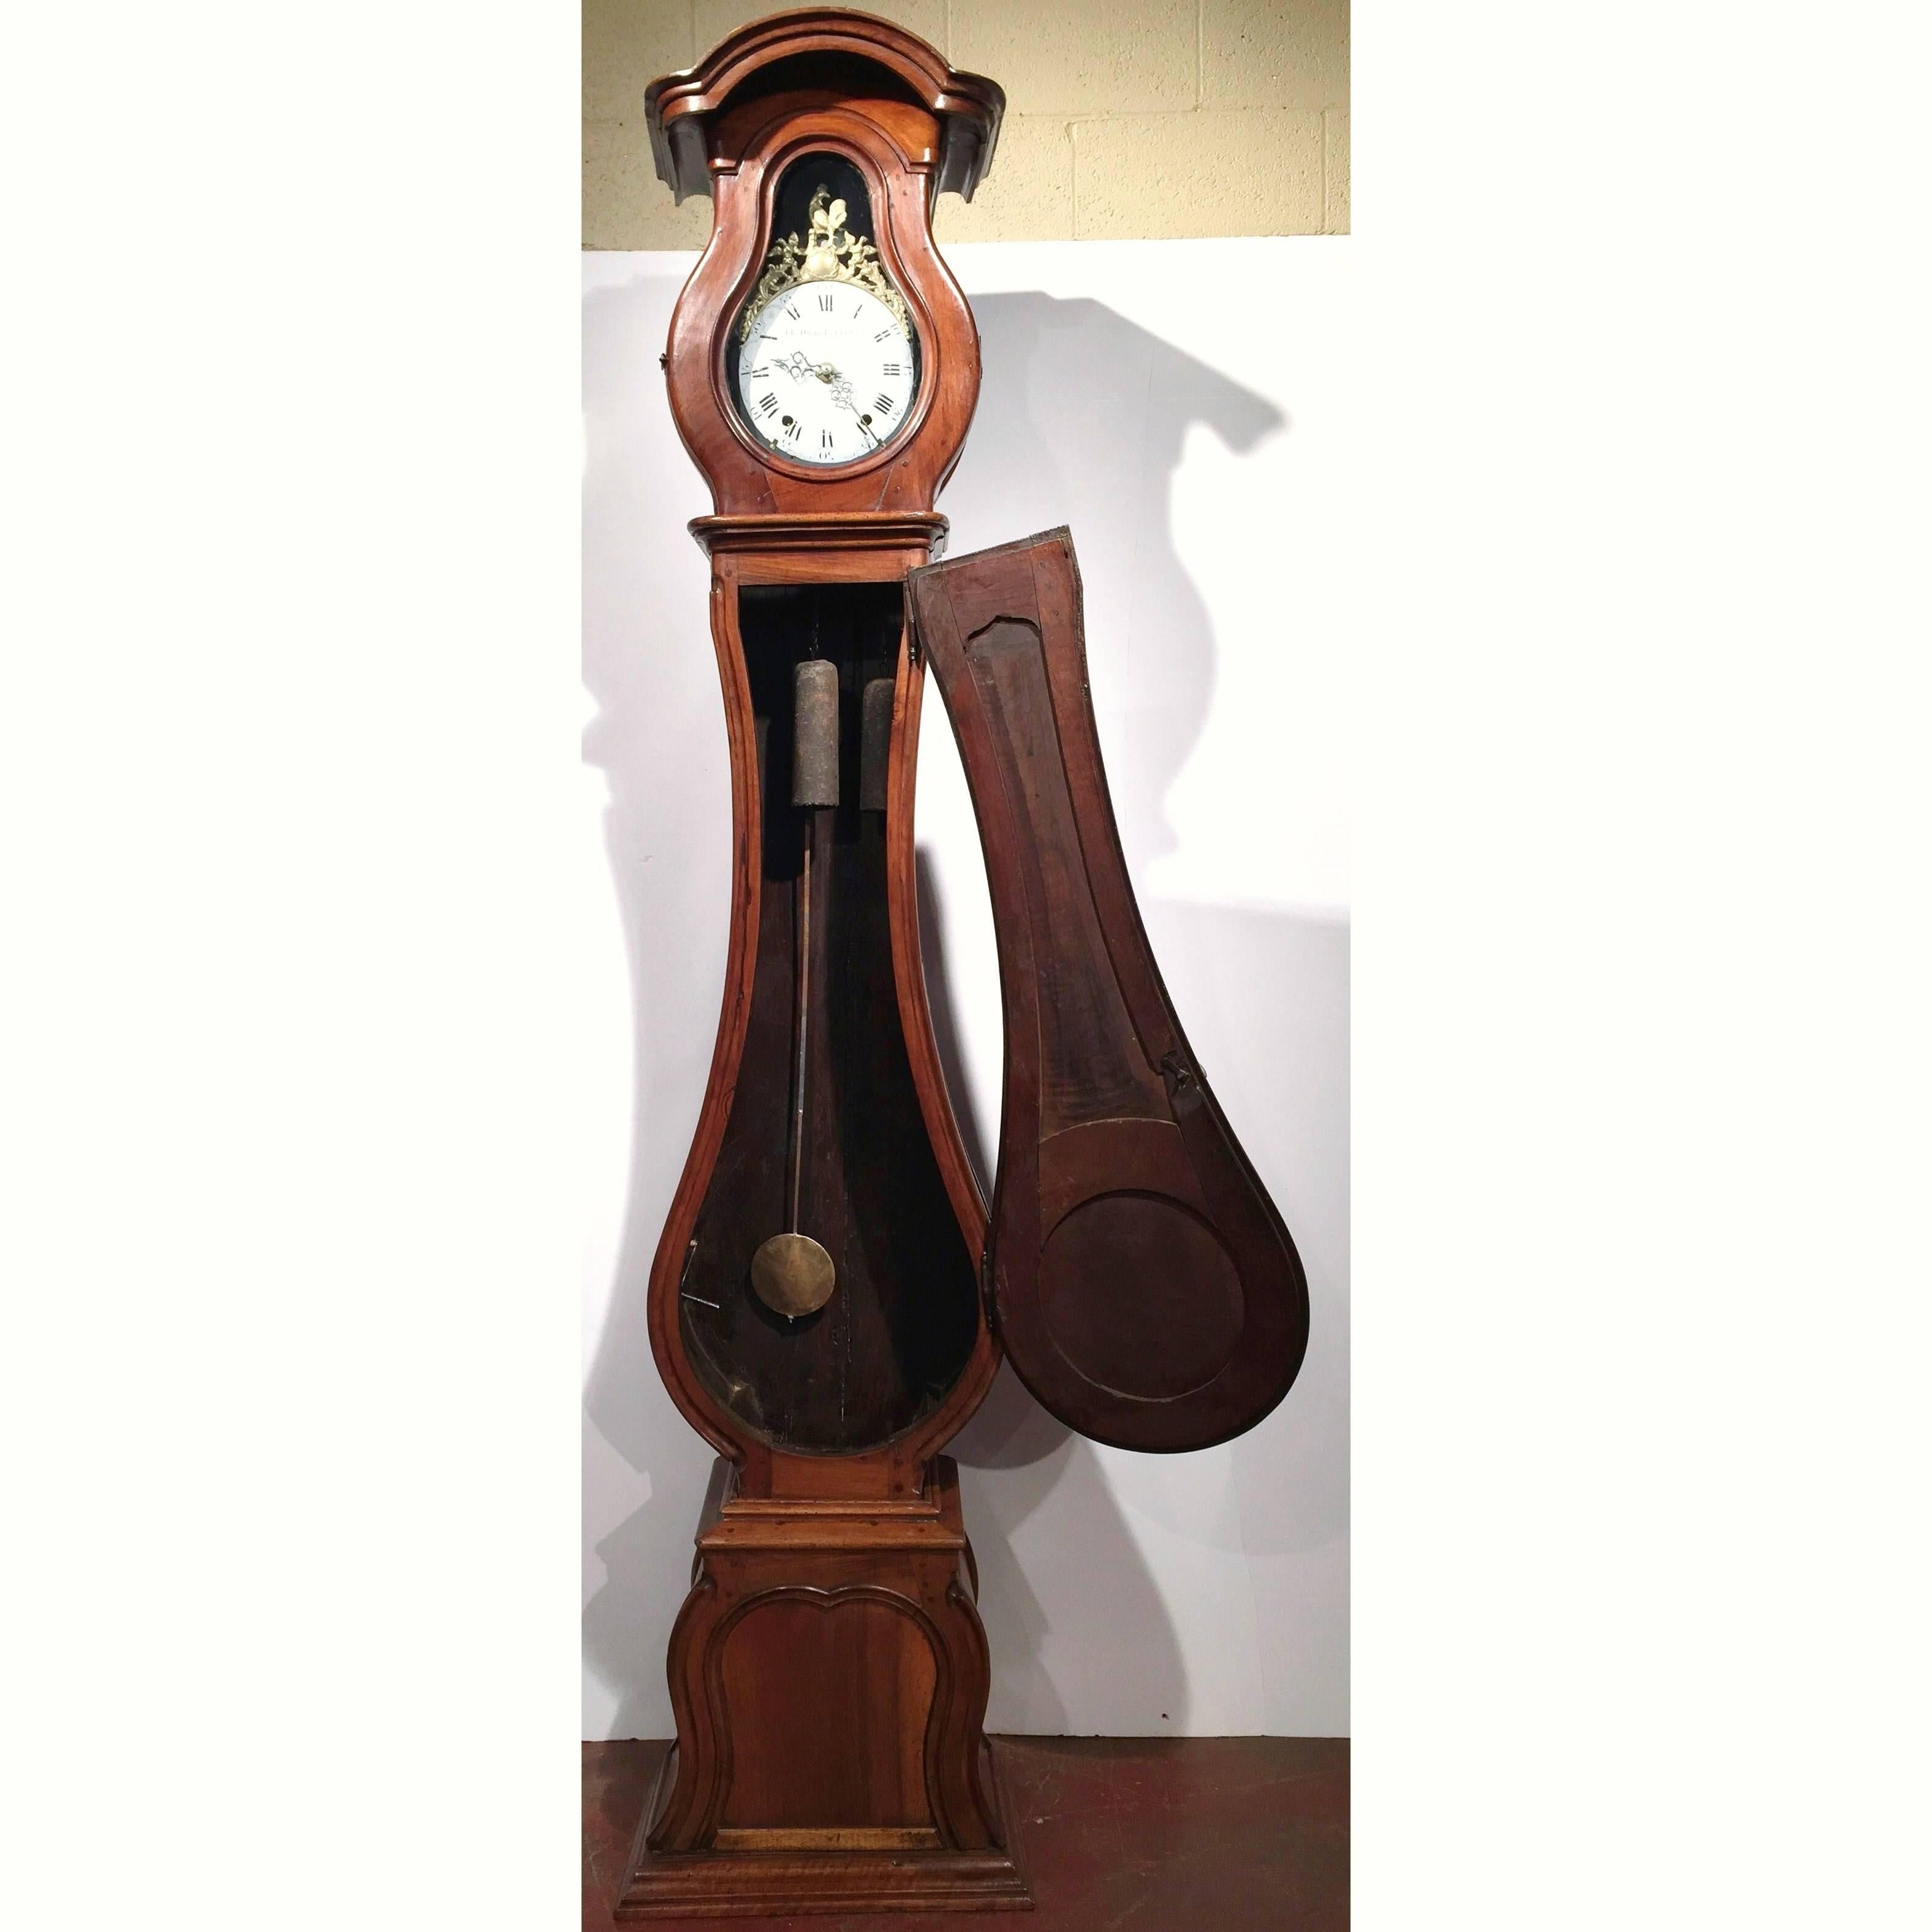 Hand-Carved 18th Century French Louis XV Carved Walnut Tall Case Clock from Lyon